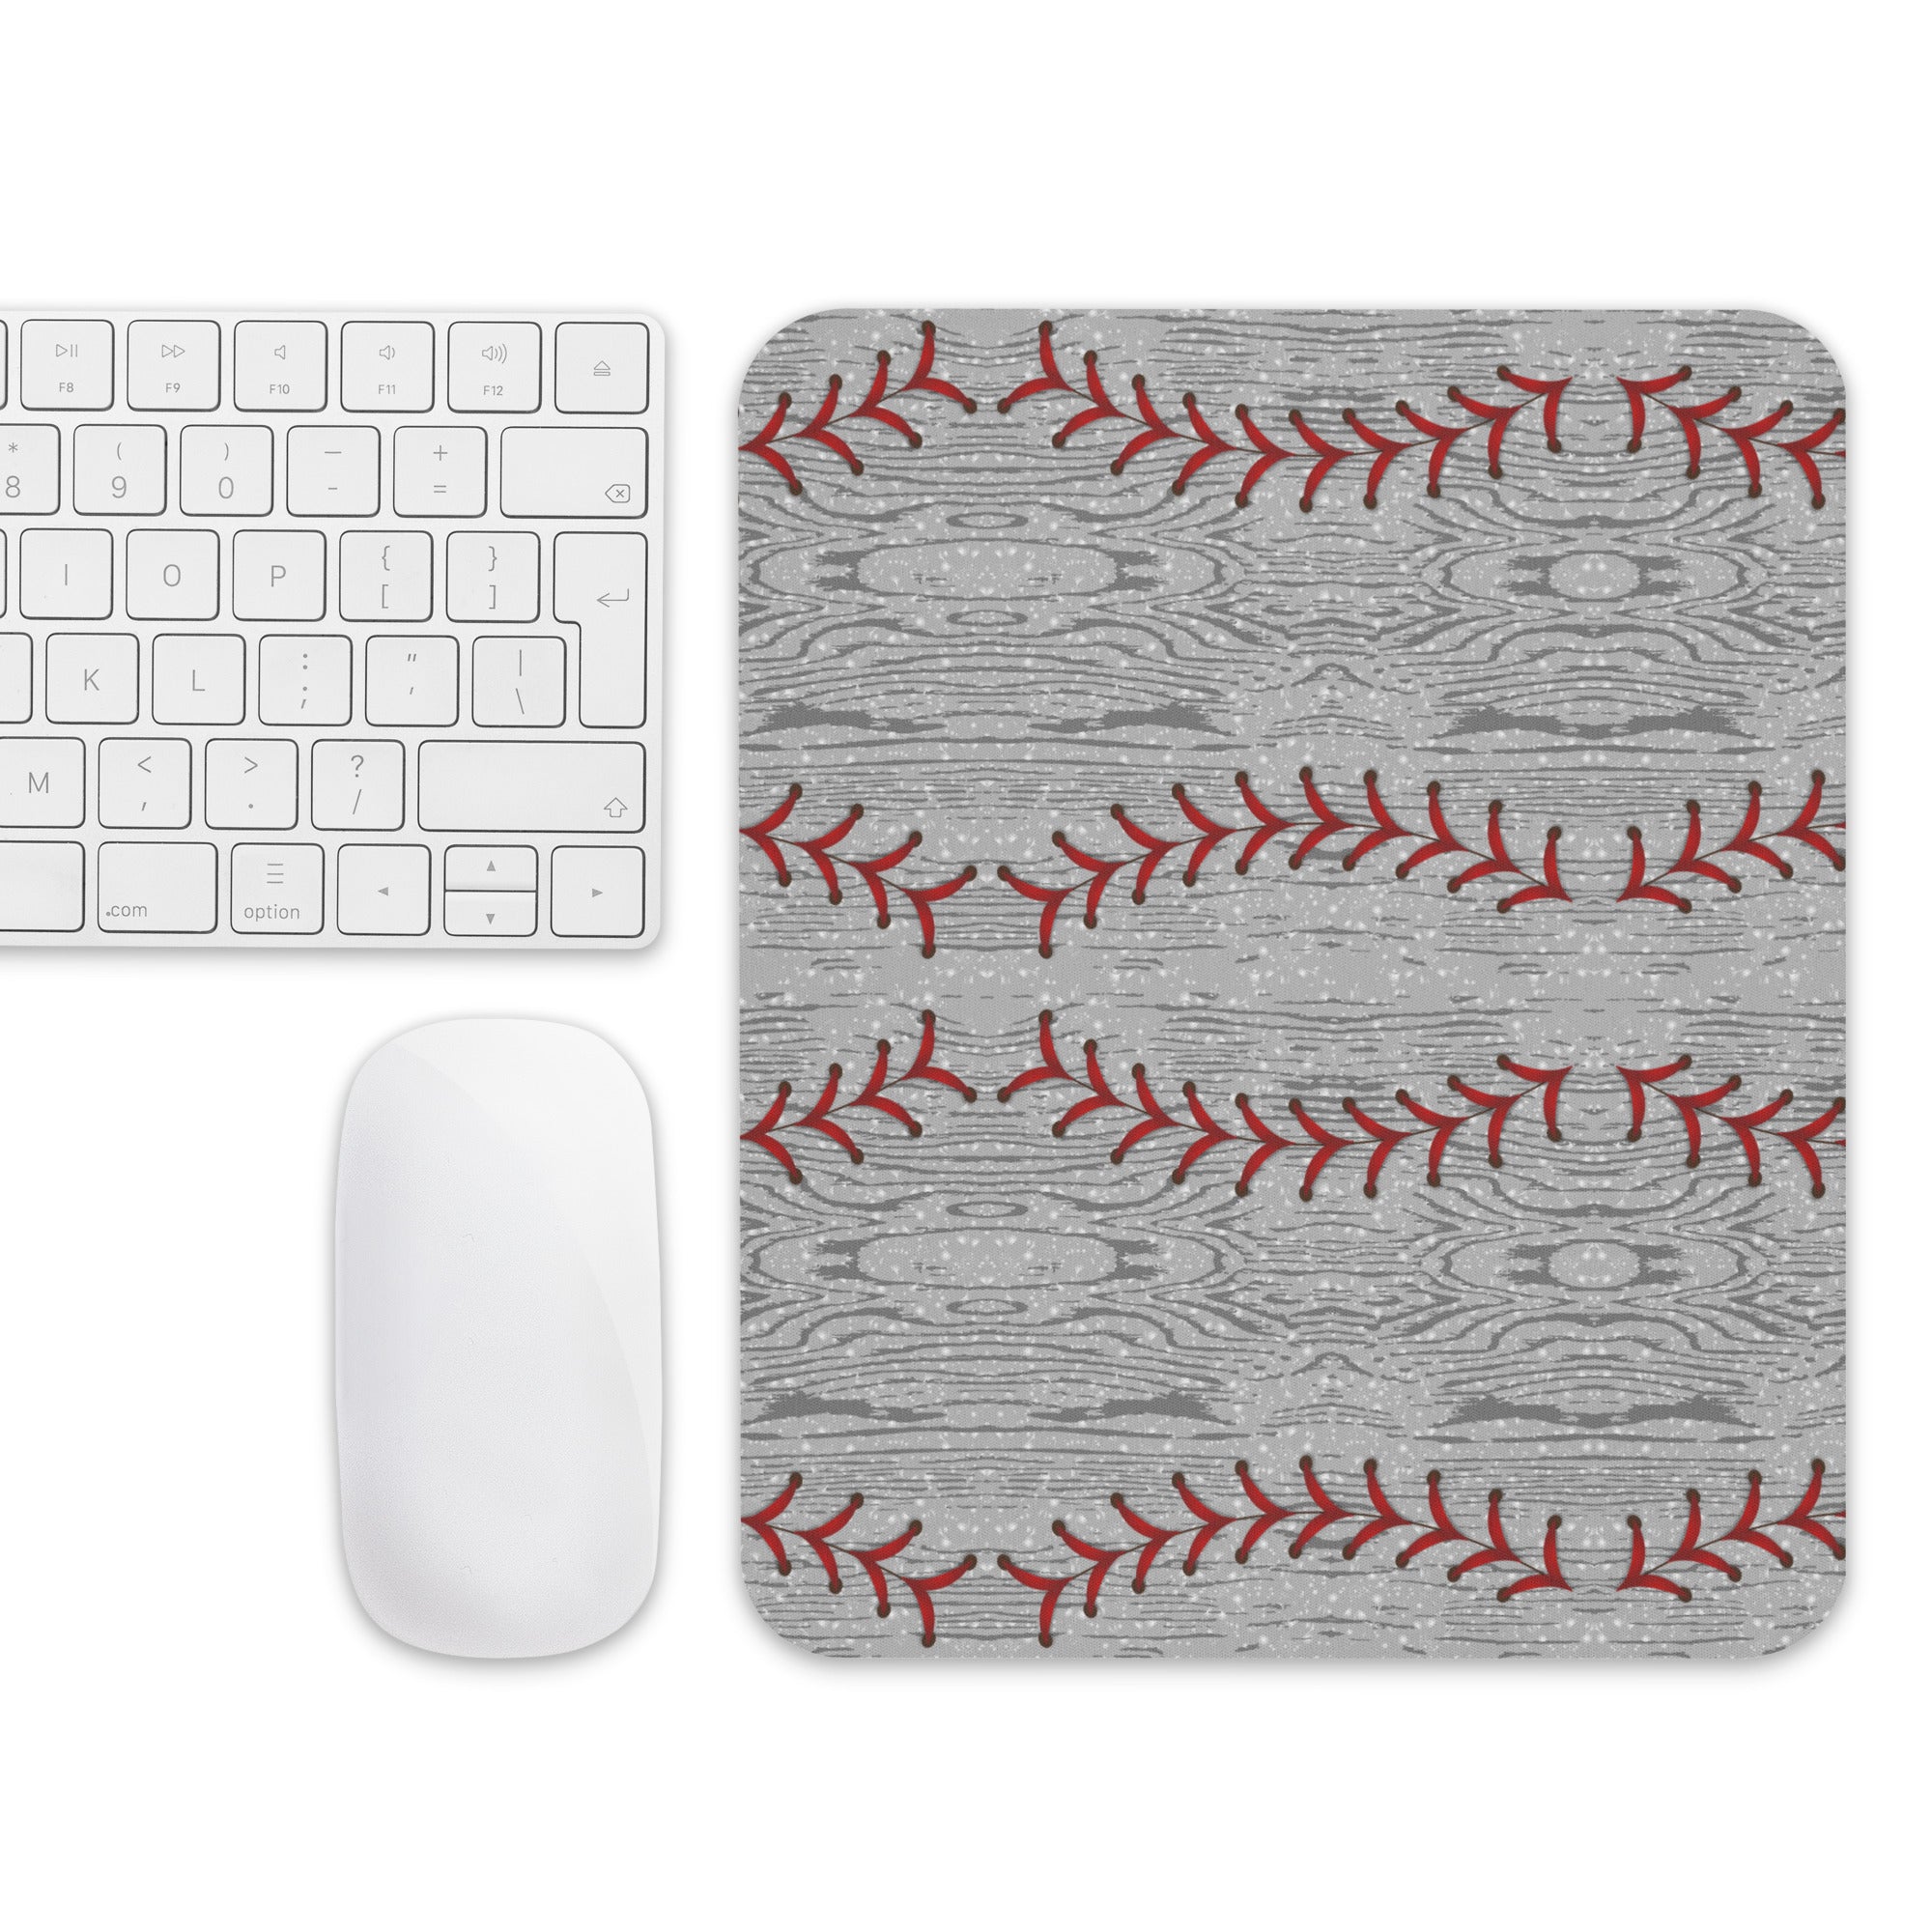 Mouse pad, Play Ball Mouse Pad, Back to School